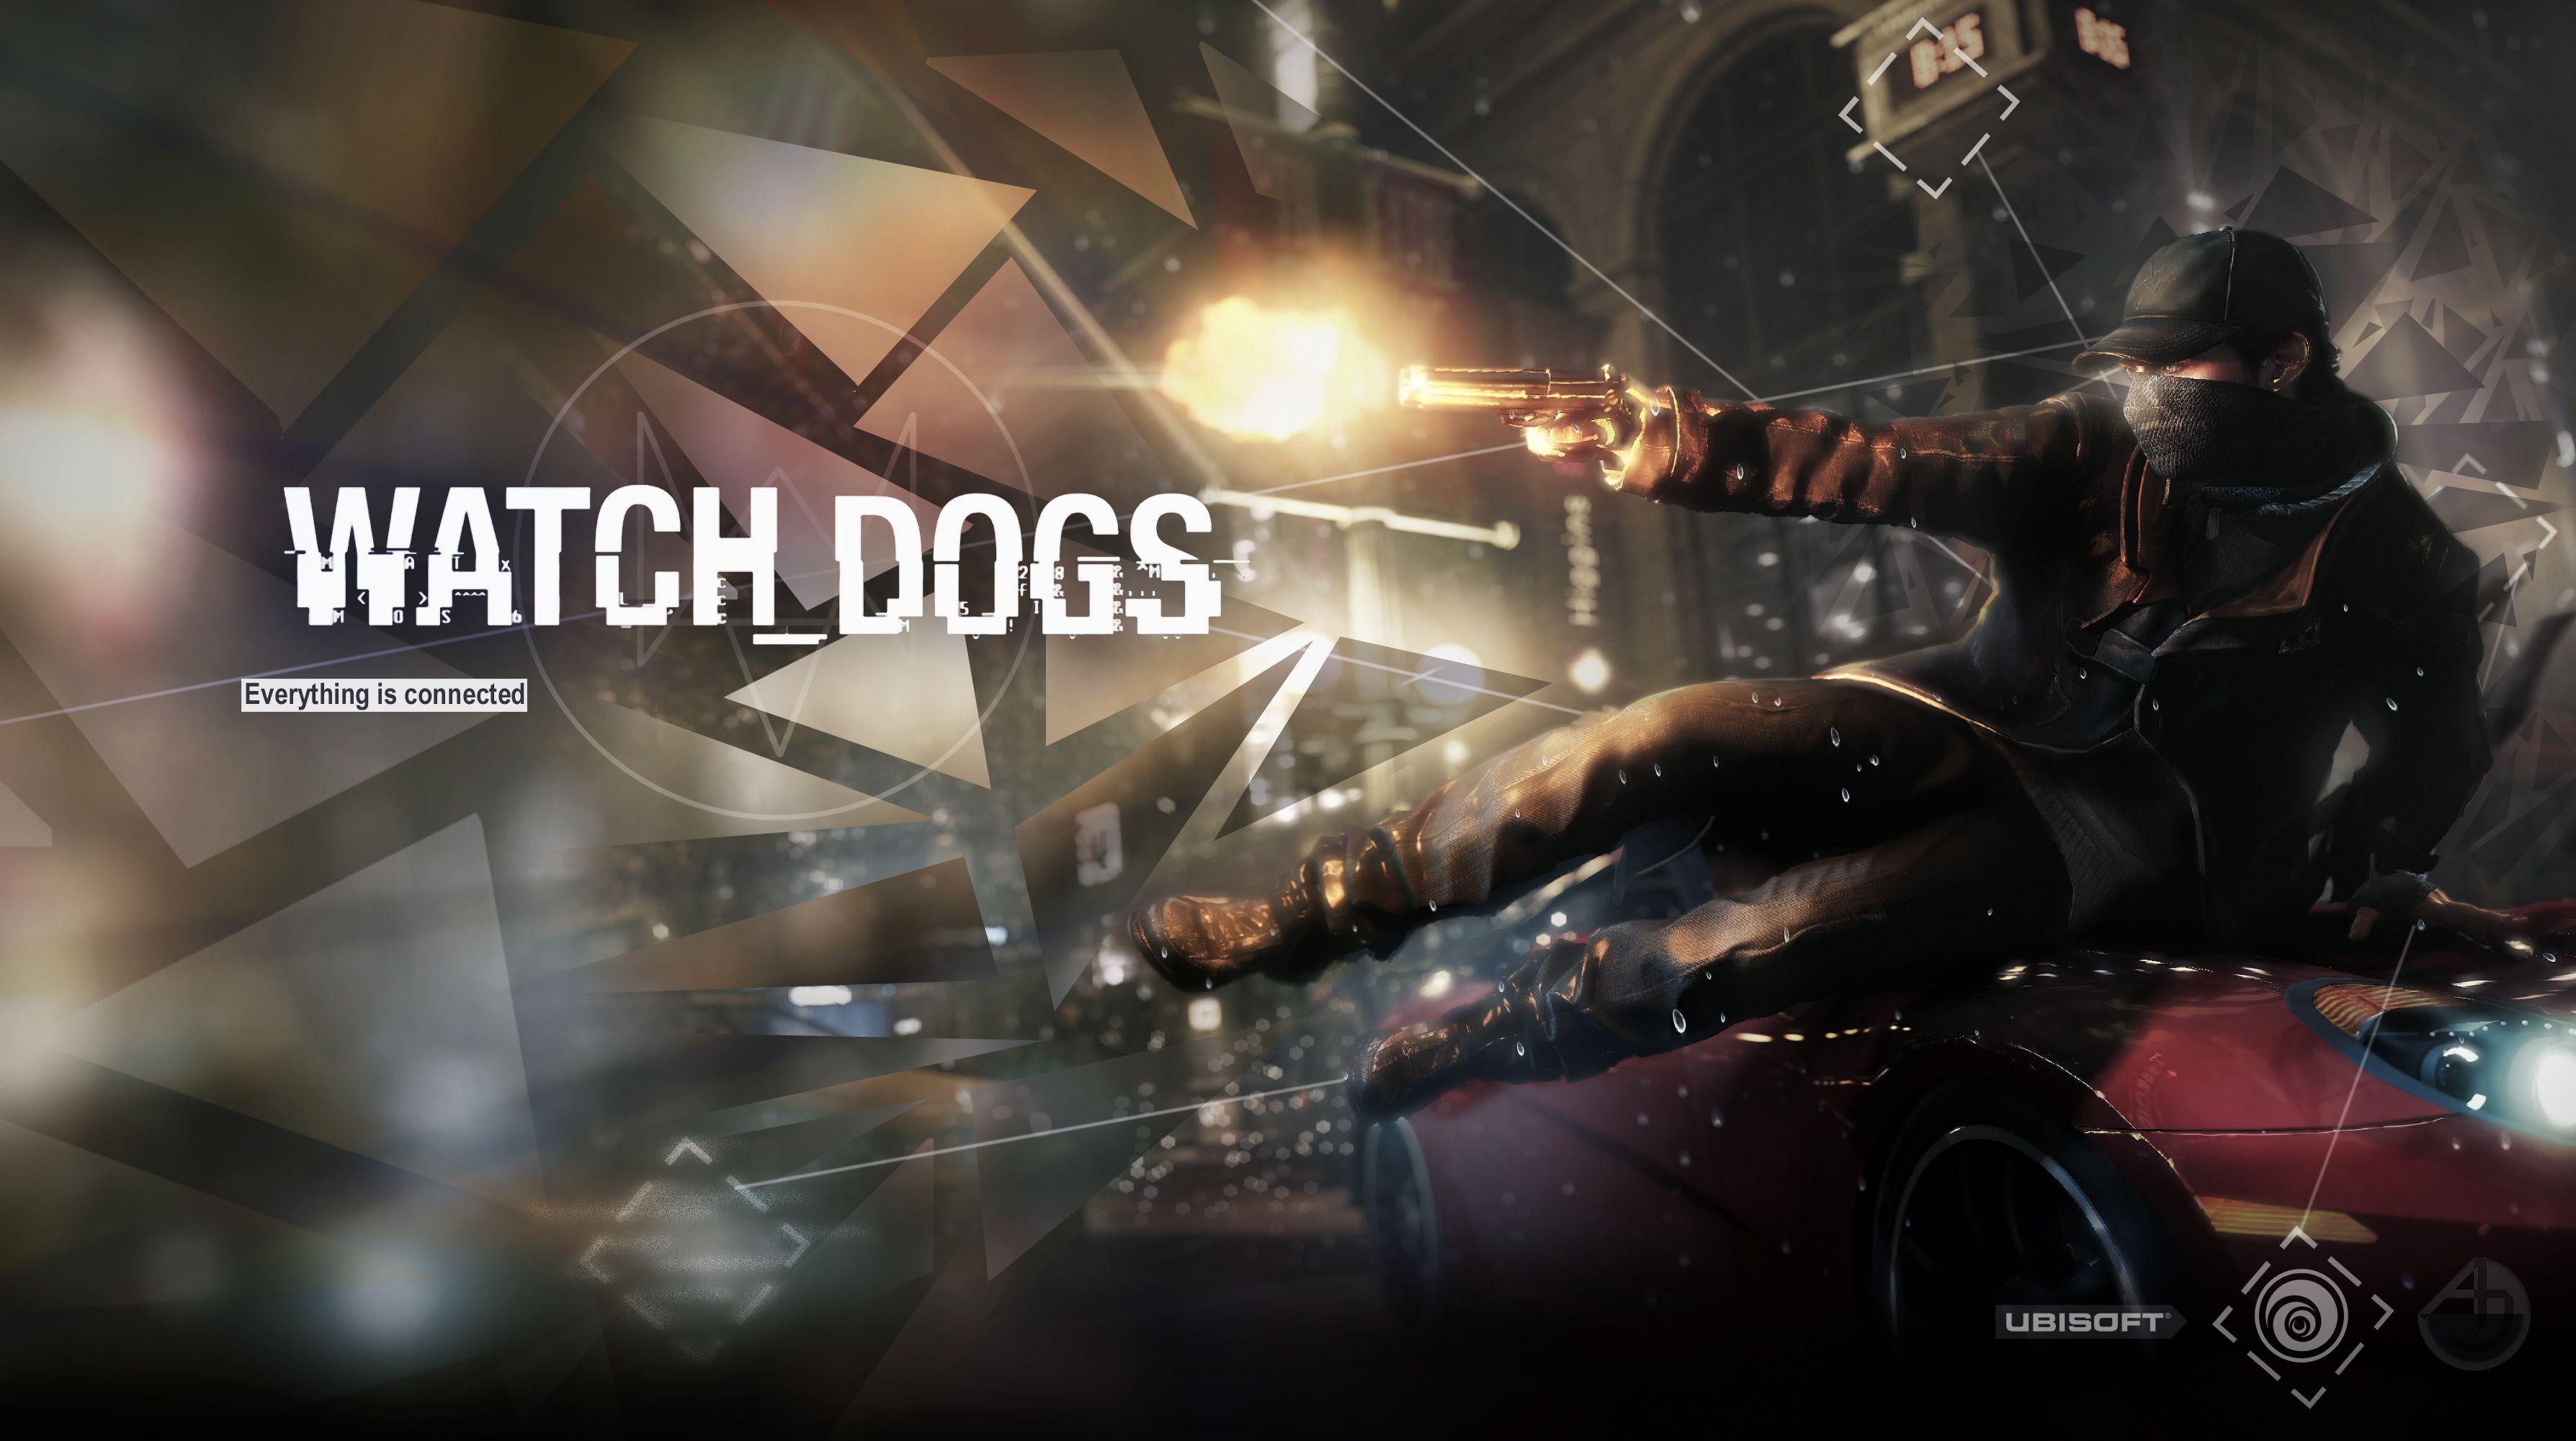 Watch Dogs Wallpapers - Wallpaper Cave